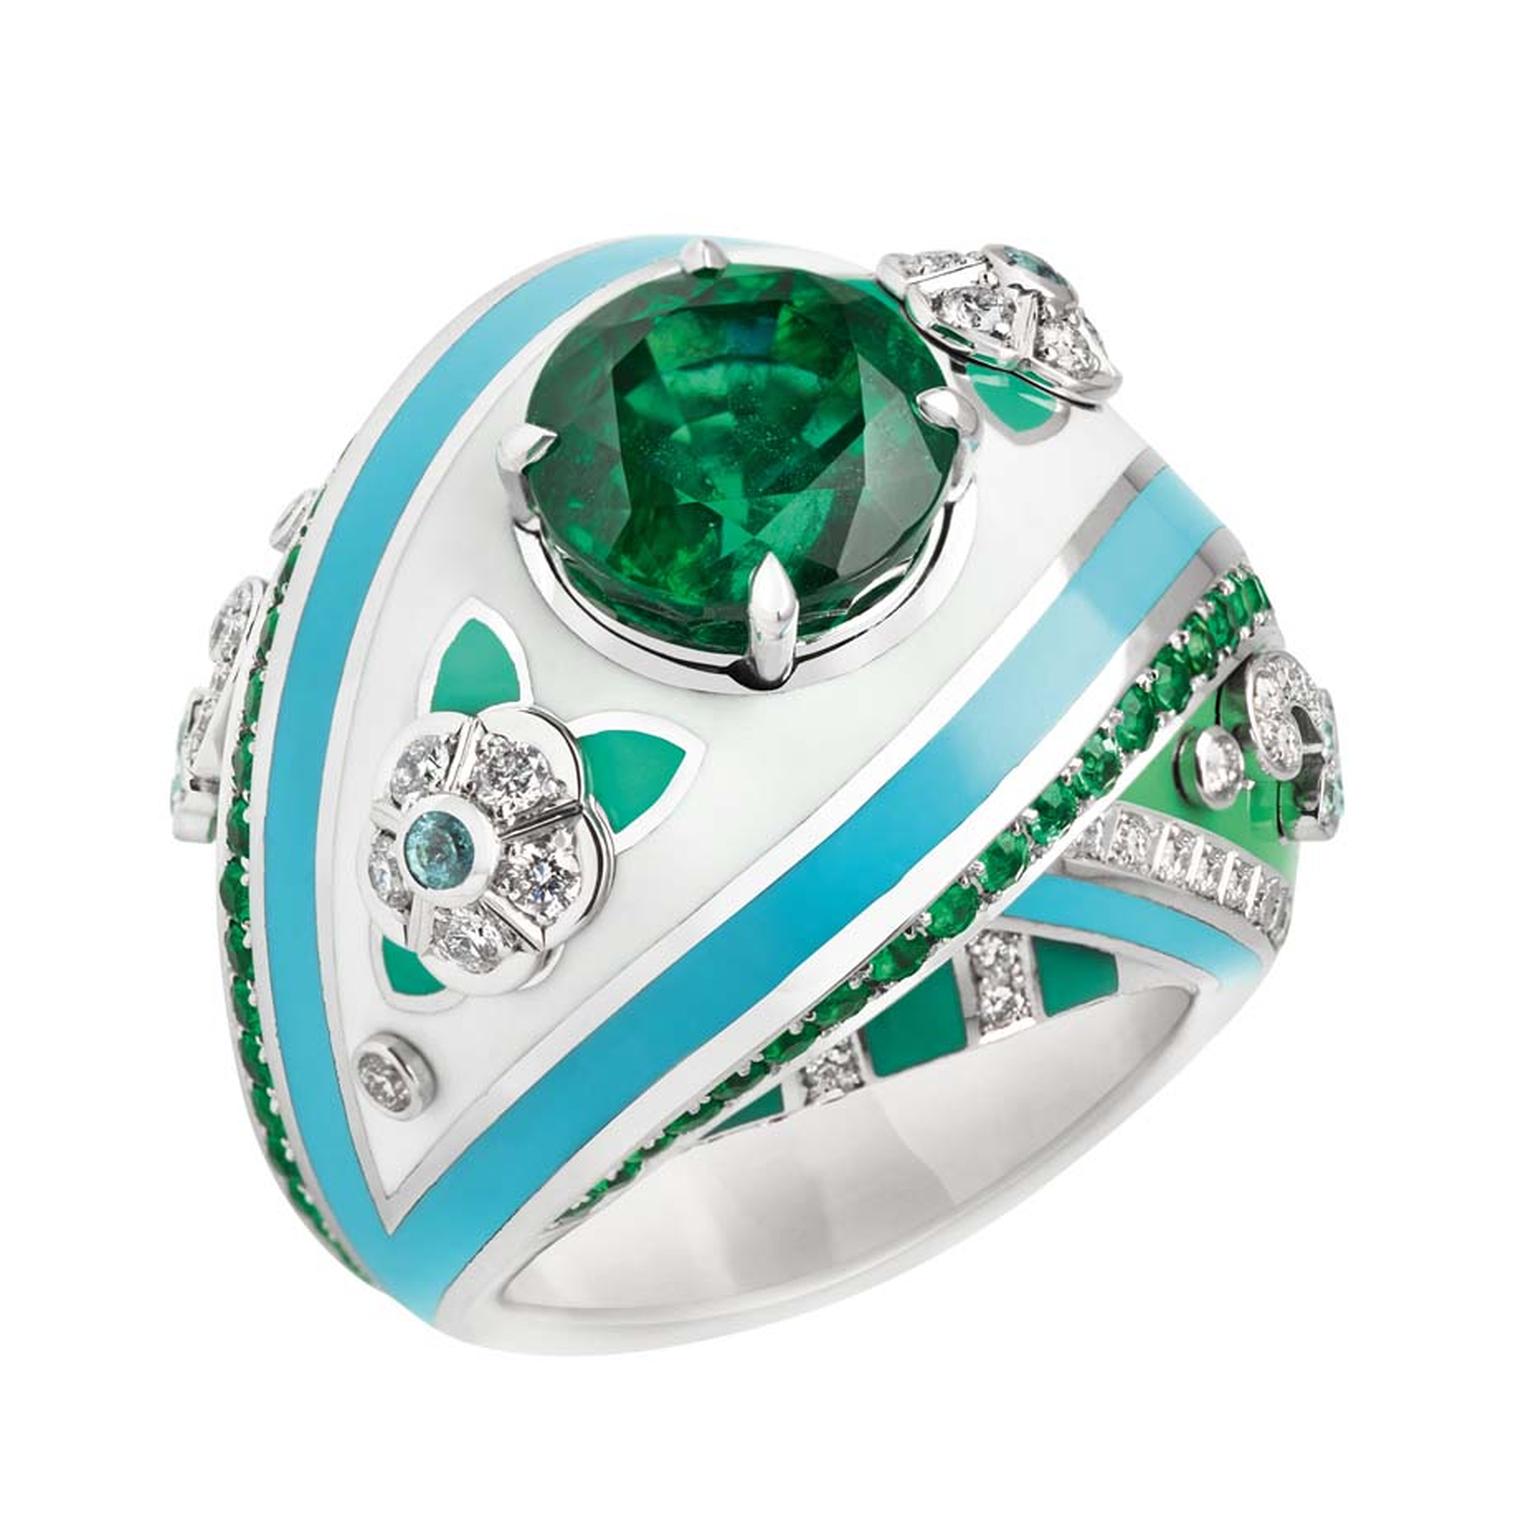 Fabergé ring from the Summer in Provence high jewellery collection, set with emeralds and diamonds and decorated with enamel.